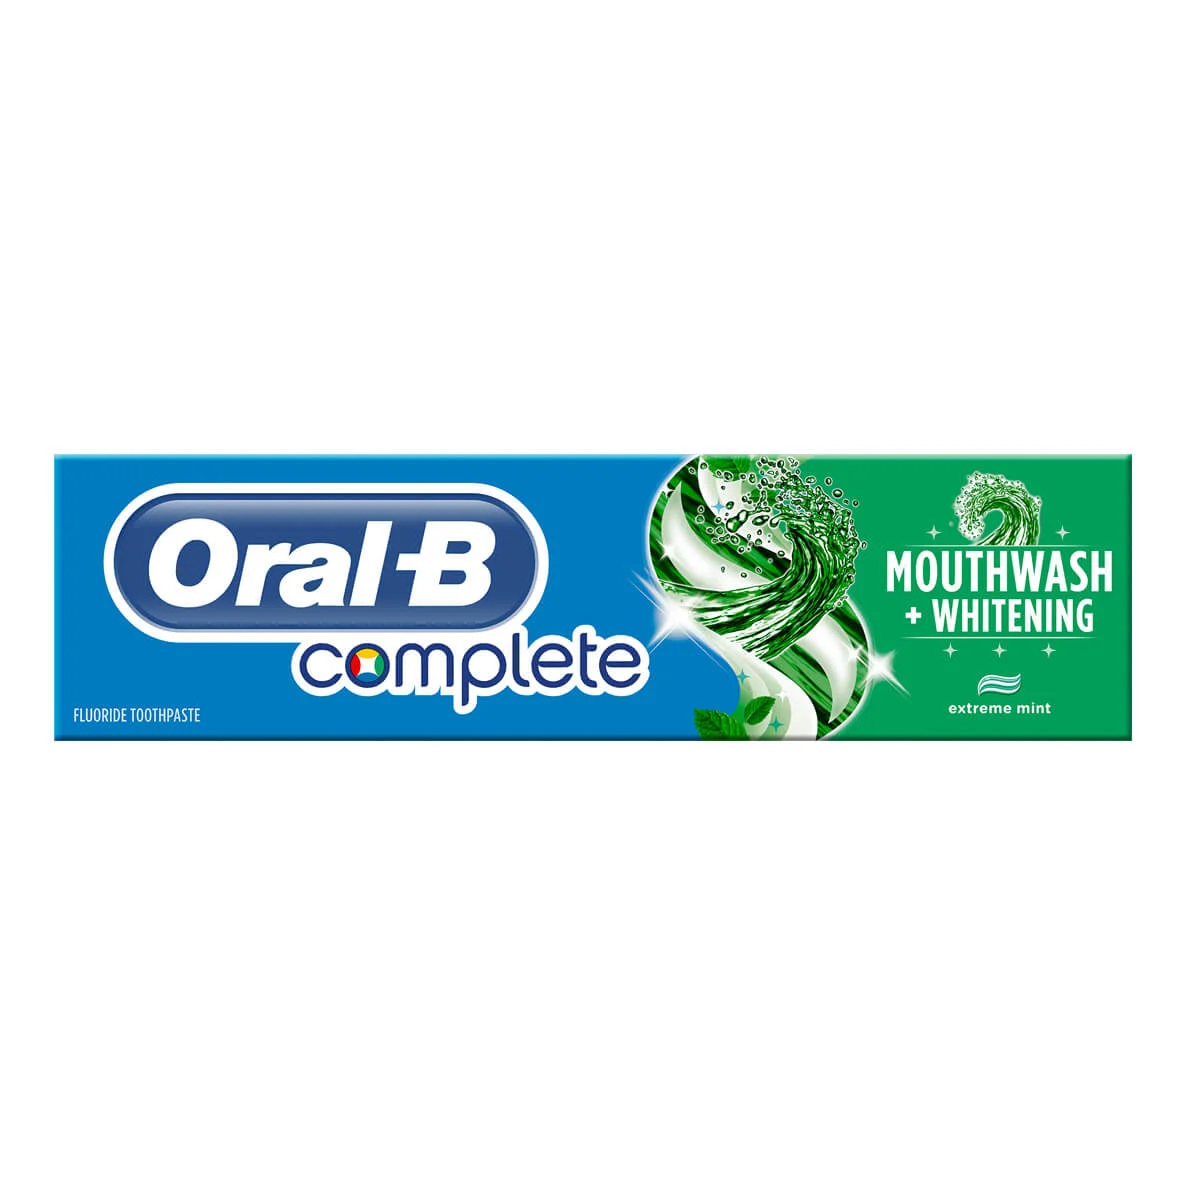 Oral-B Complete Mouthwash + Whitening Toothpaste 